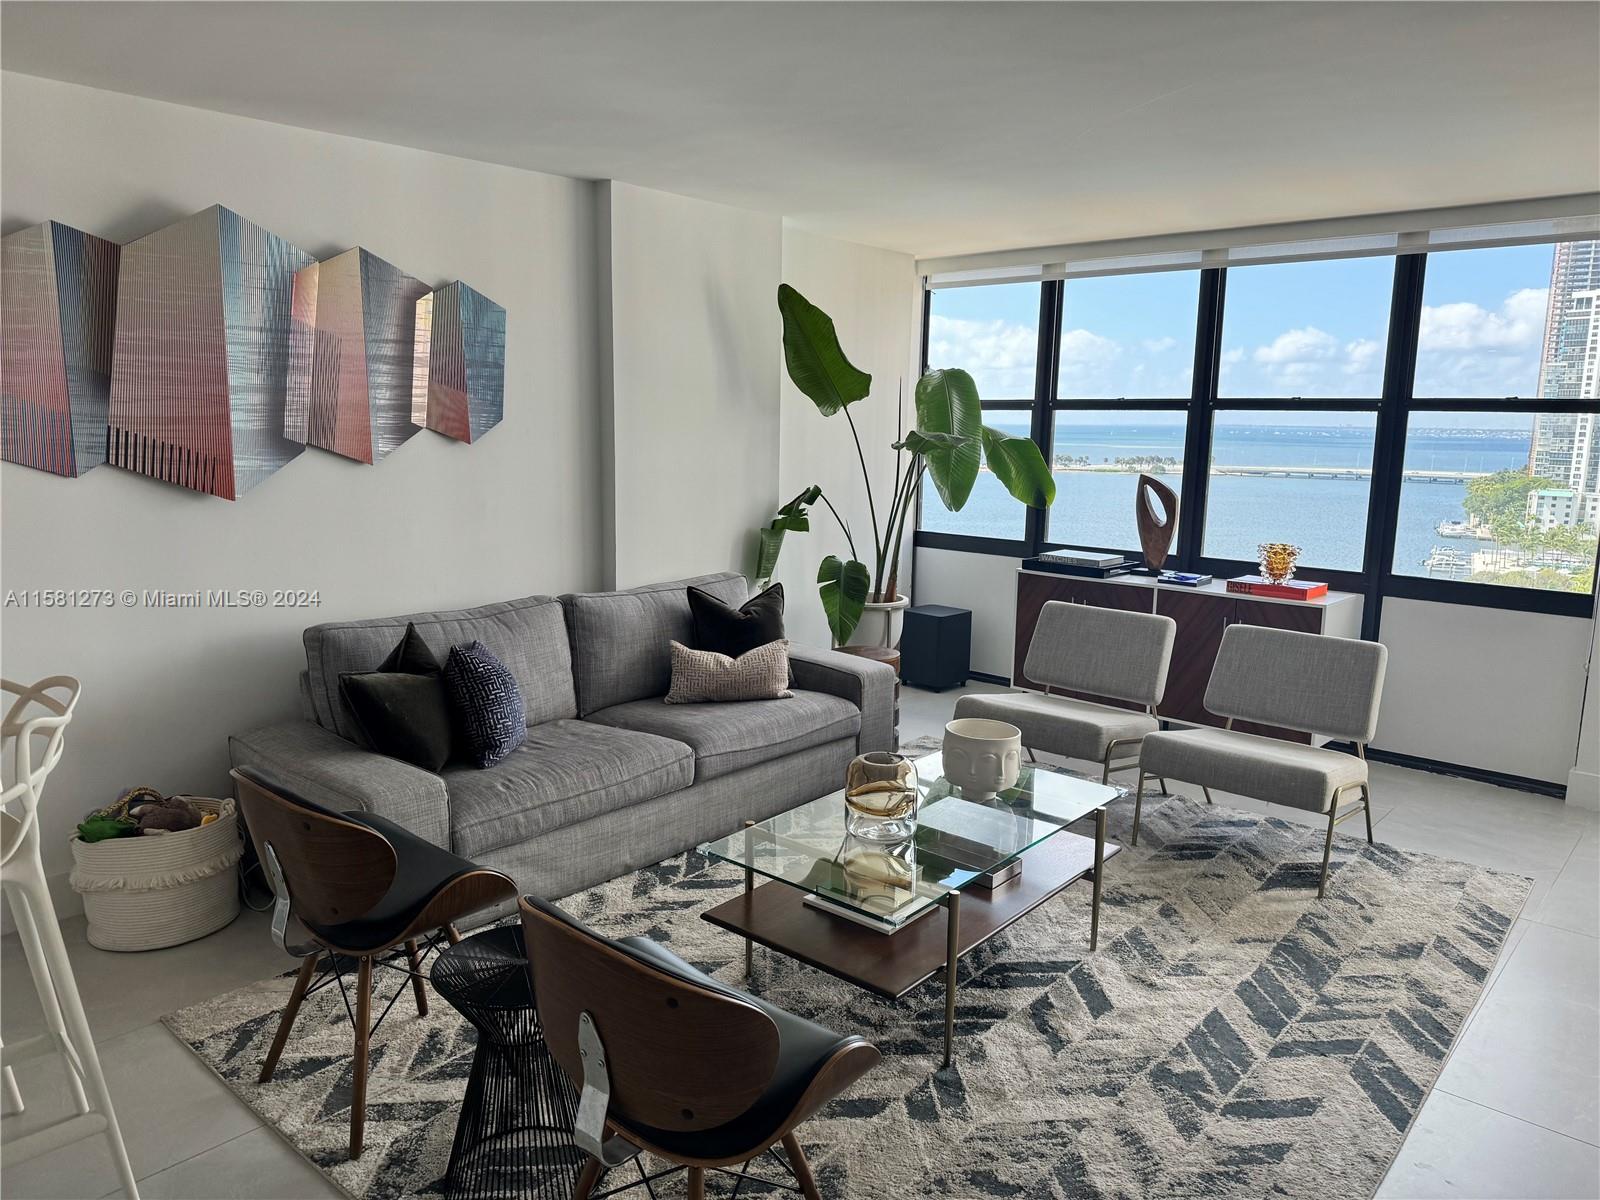 Spectacular bay view! Furnished, recently remodeled with 2 parking spaces.